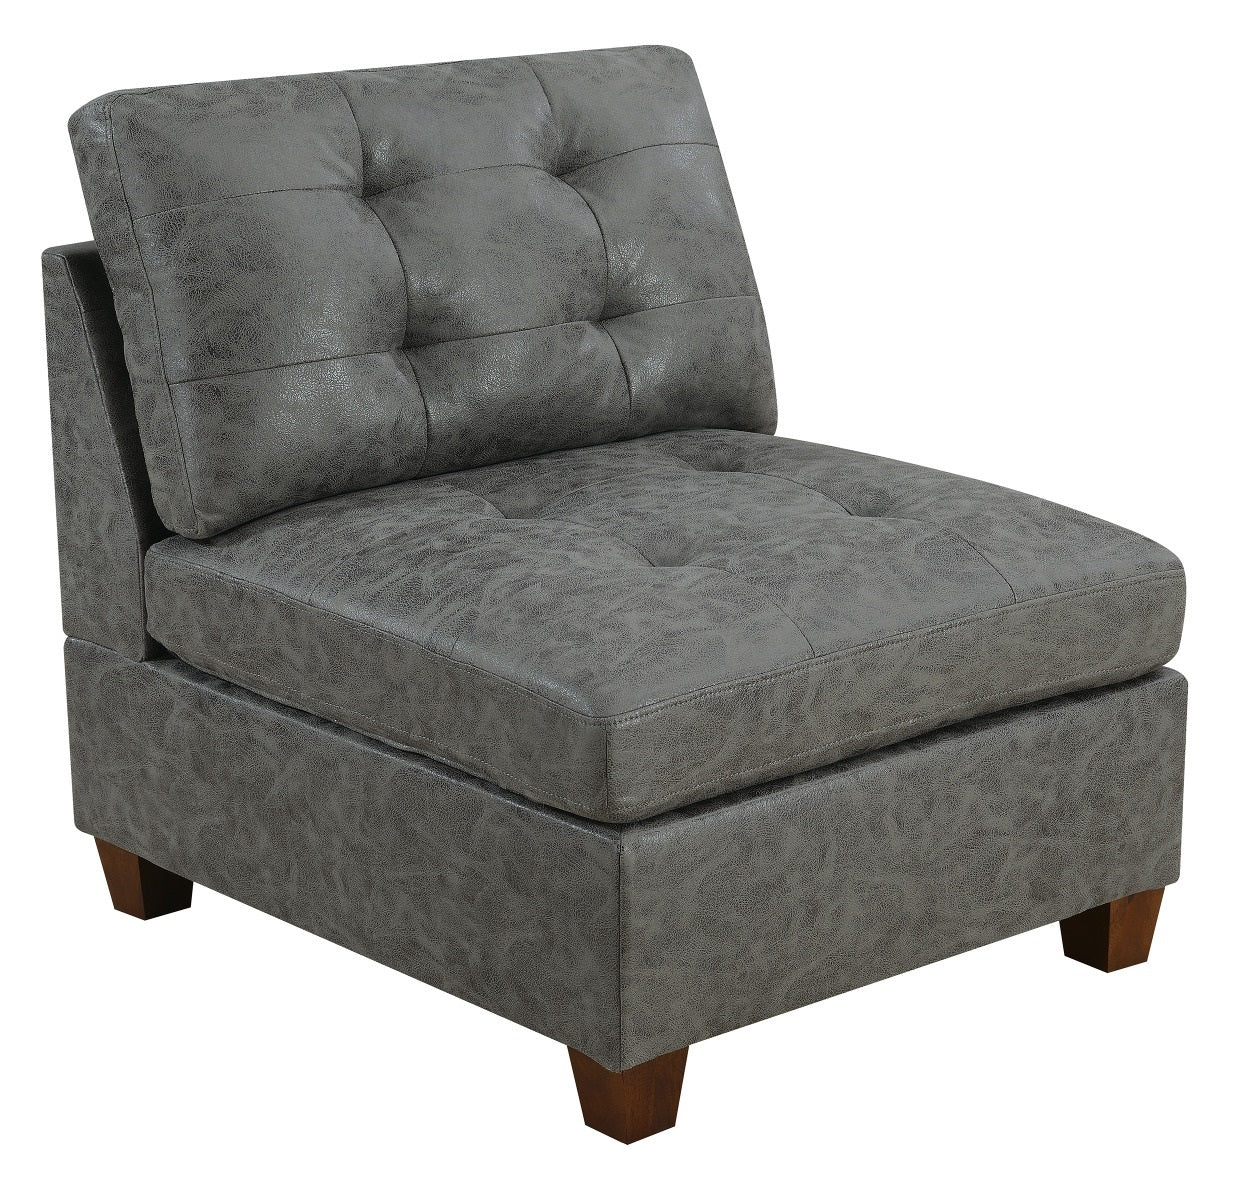 Living Room Furniture Tufted Armless Chair Antique grey-primary living